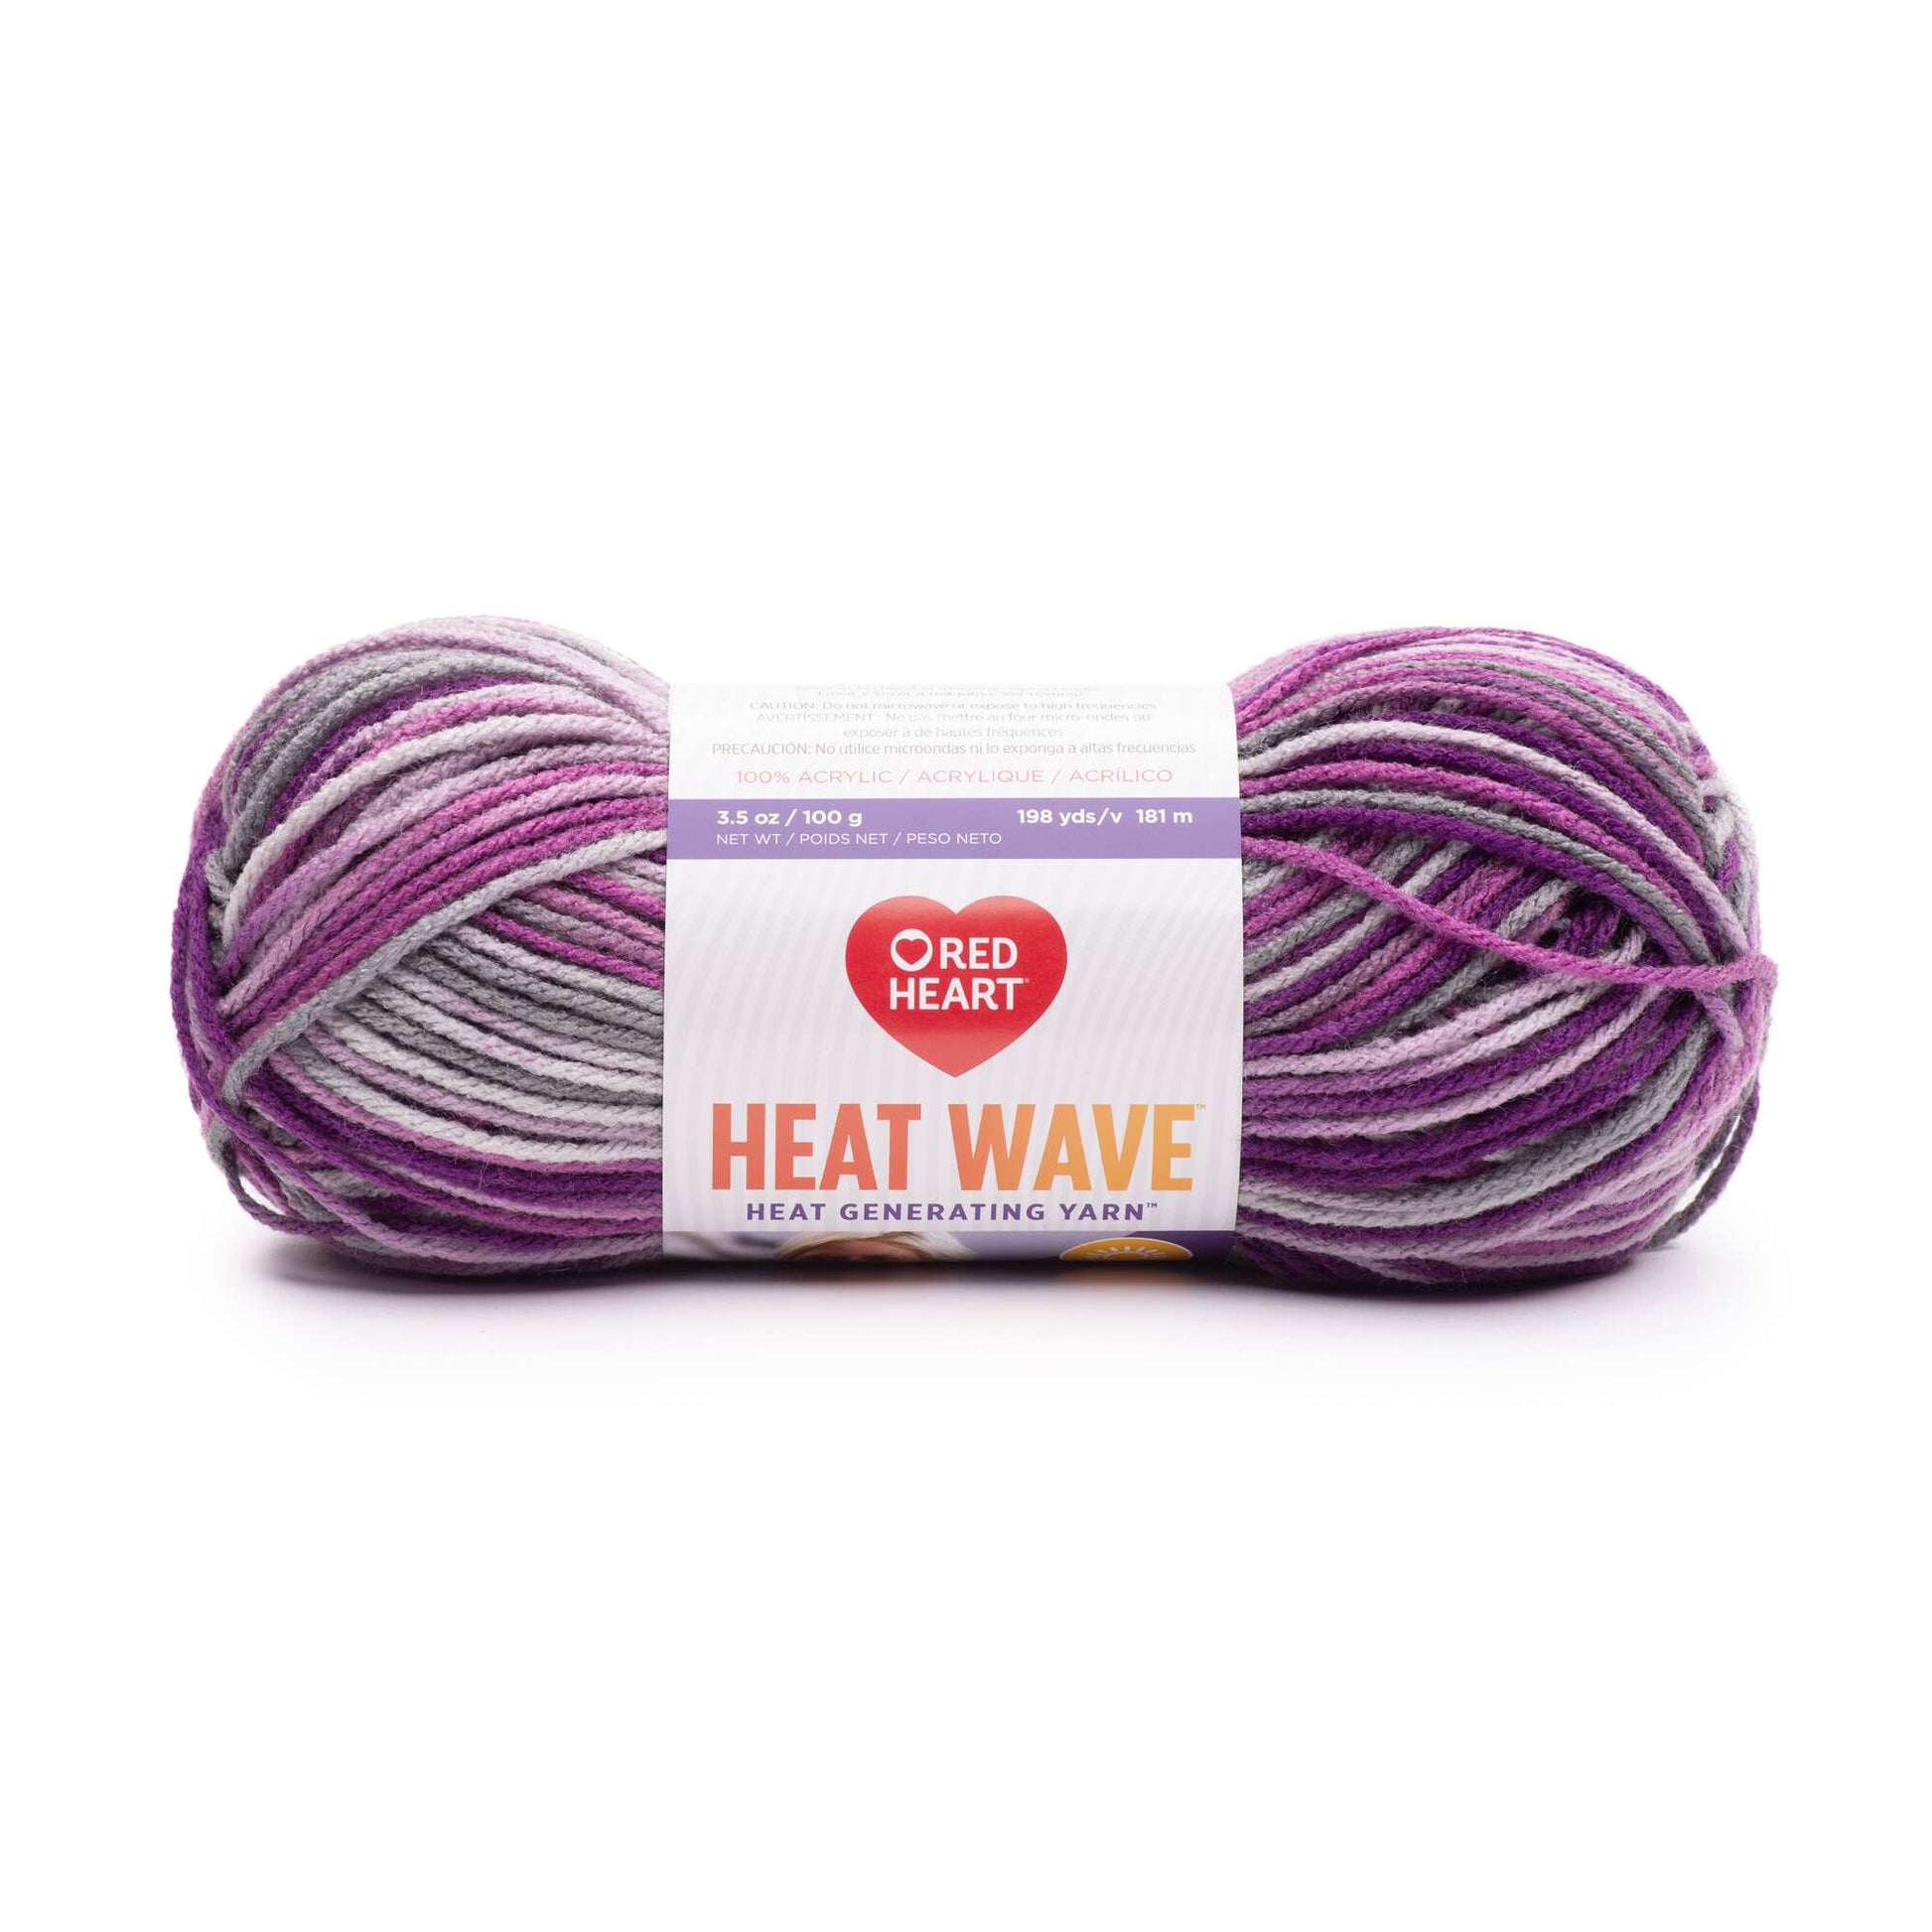 Red Heart Heat Wave Yarn - Discontinued shades